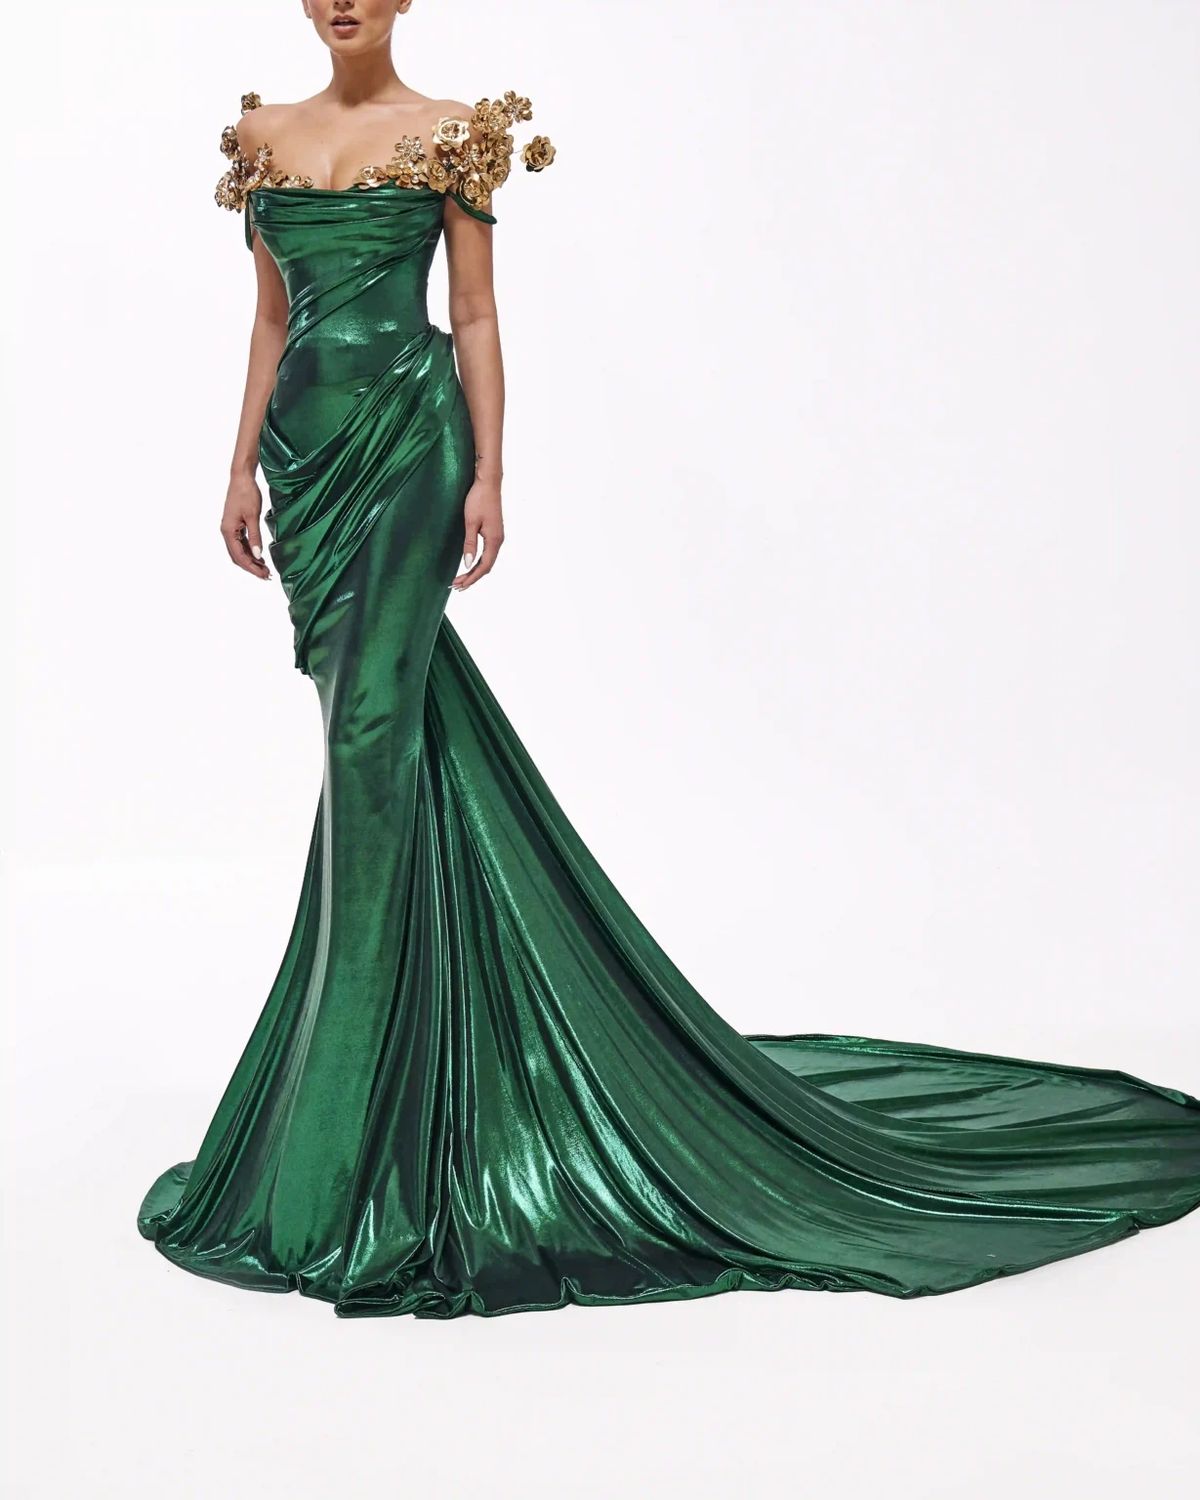 Style metallic-majesty-24-26 Valdrin Sahiti Size L Pageant Green Mermaid Dress on Queenly